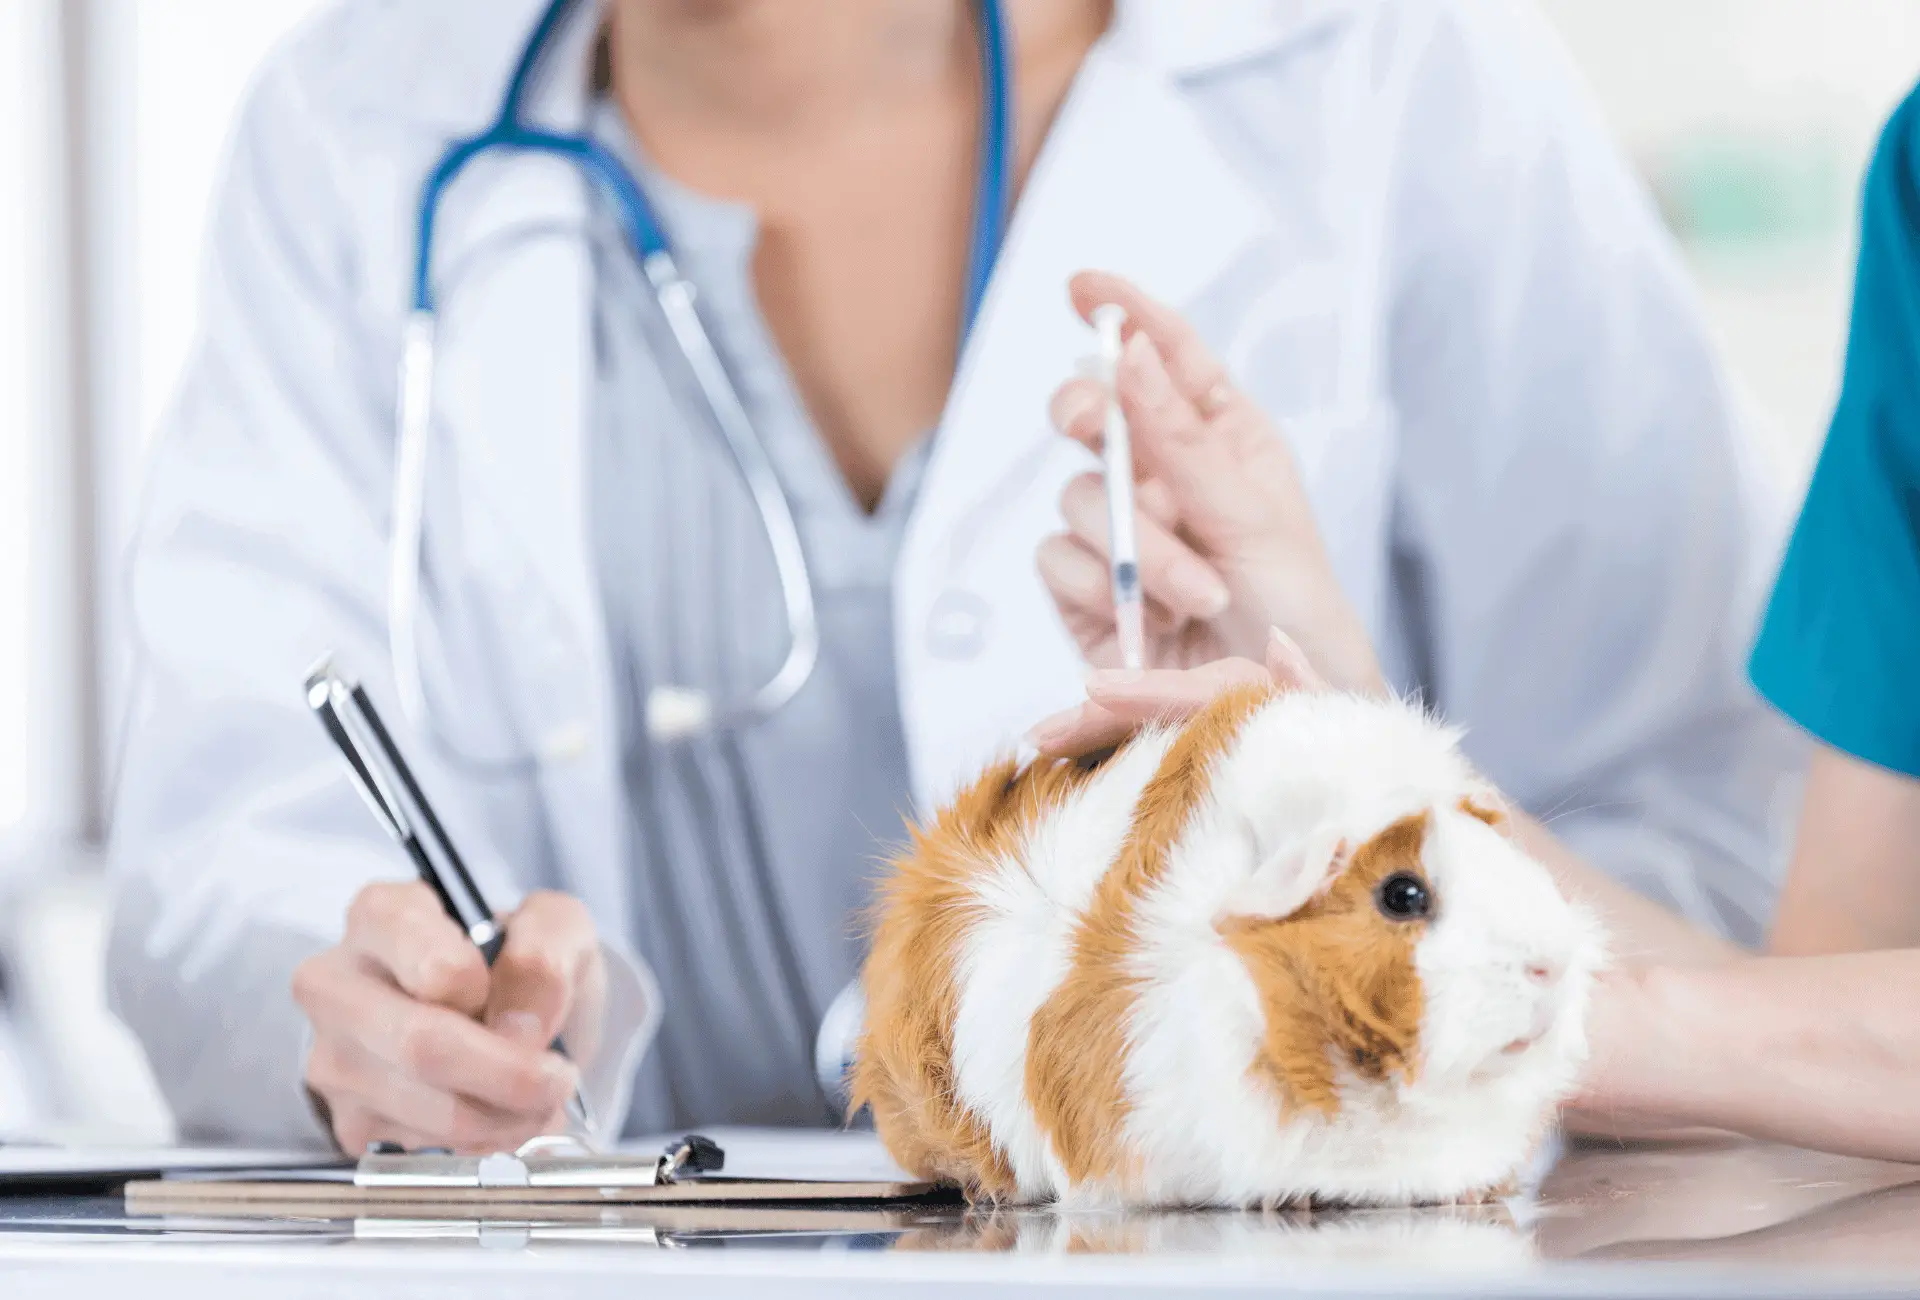 Vet makes a movement as if she is administering shots to the guinea pig.